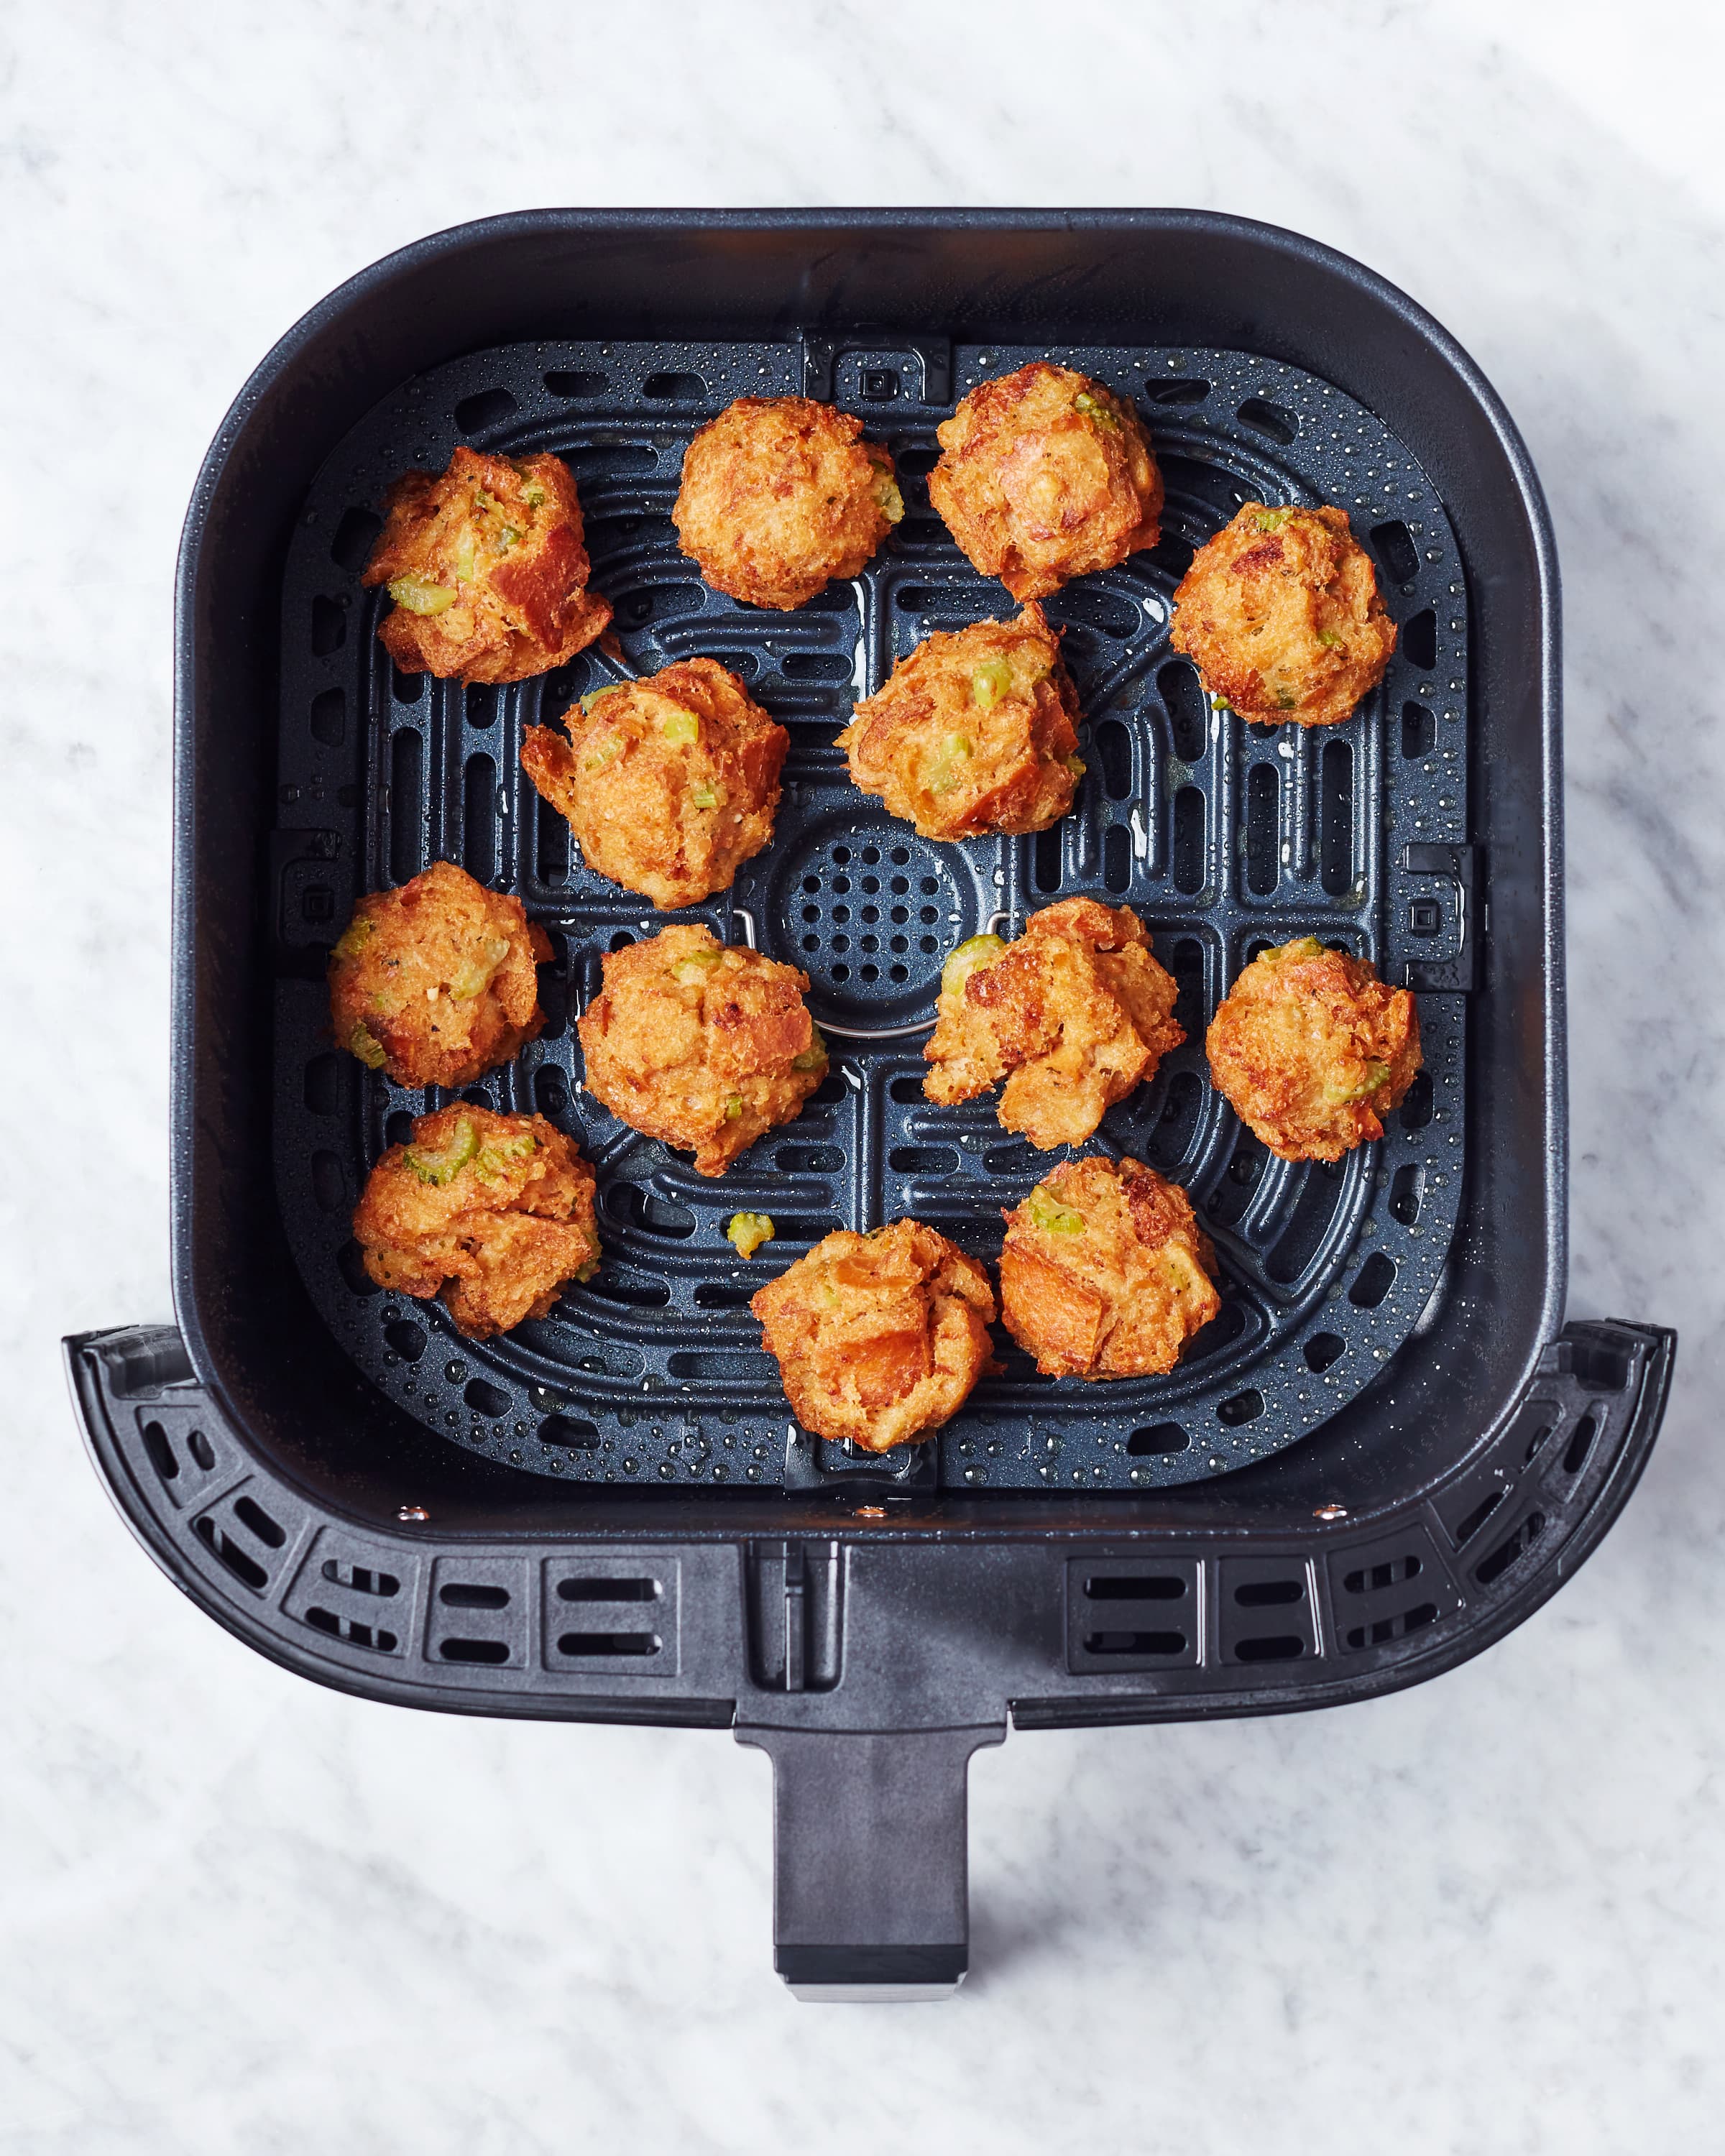 I just bought an air fryer — don't make the same mistake I did